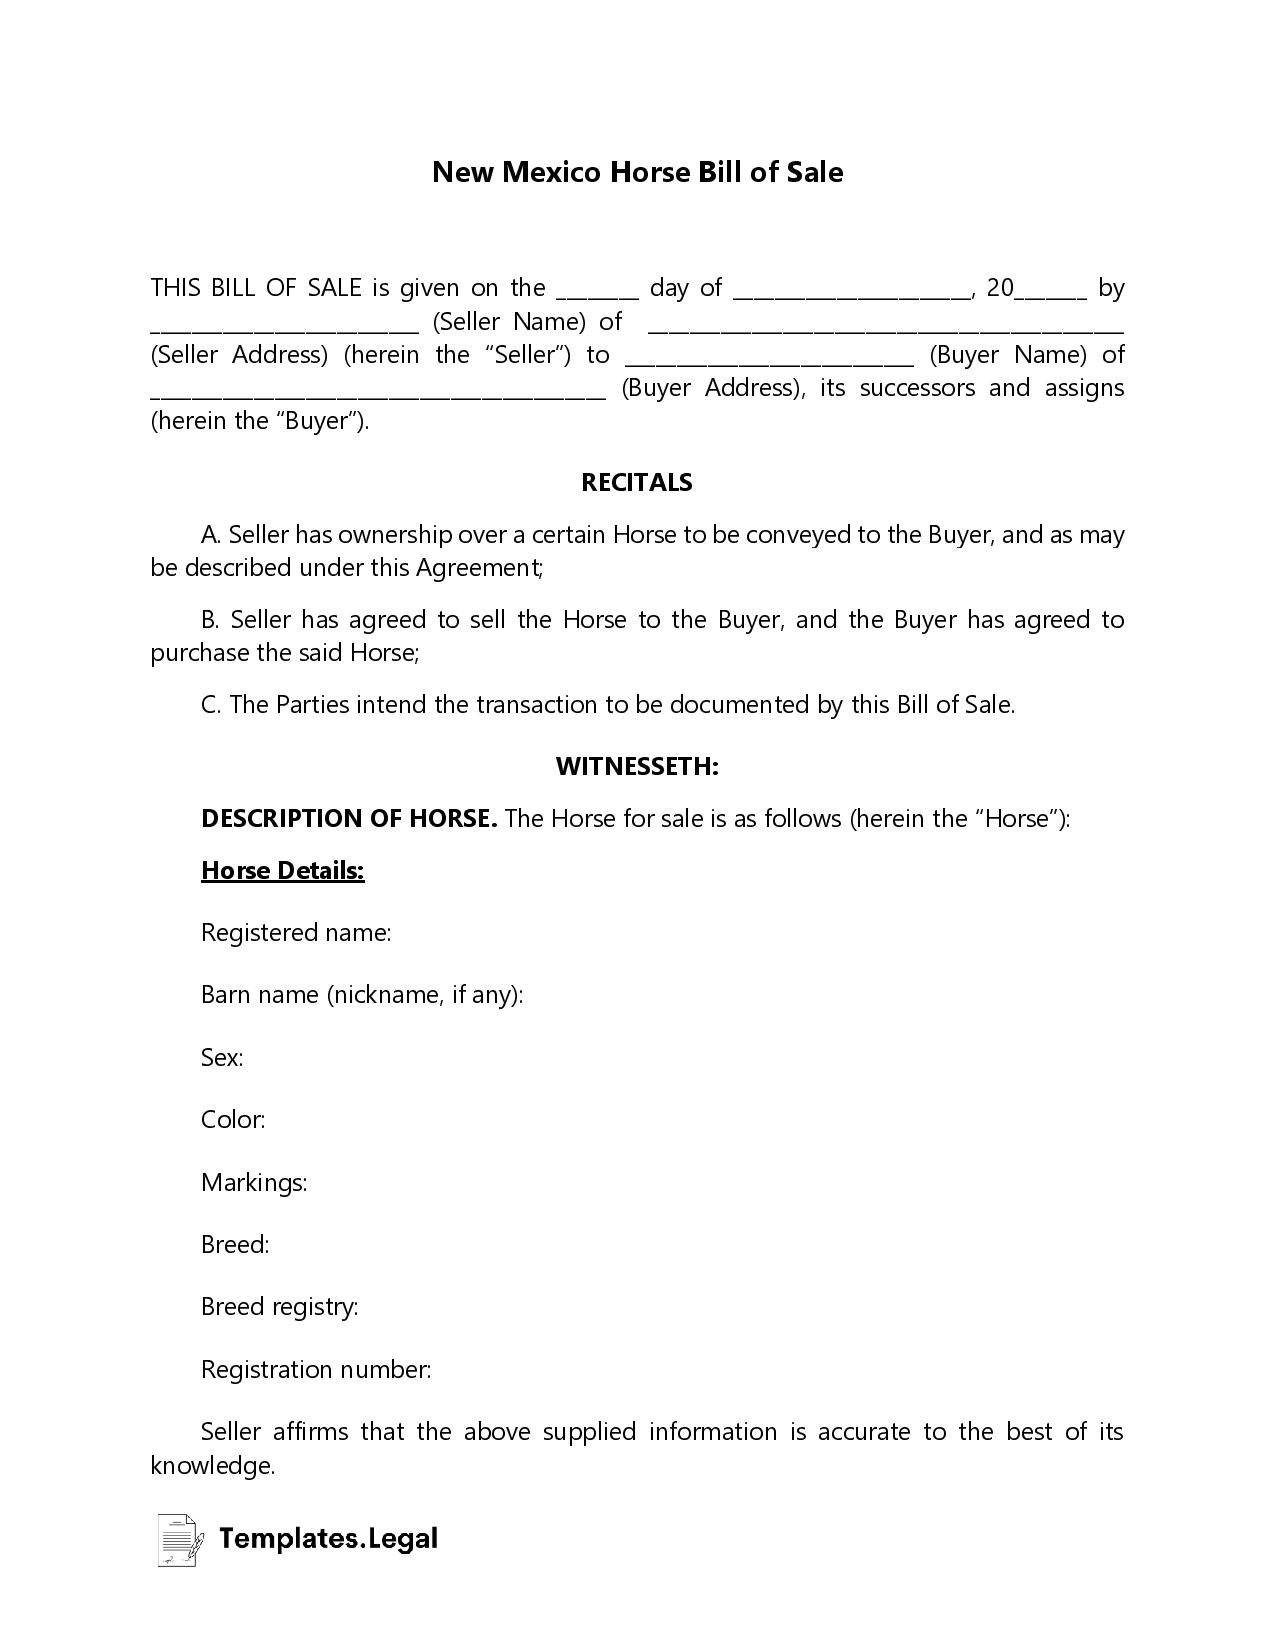 New Mexico Horse Bill of Sale - Templates.Legal